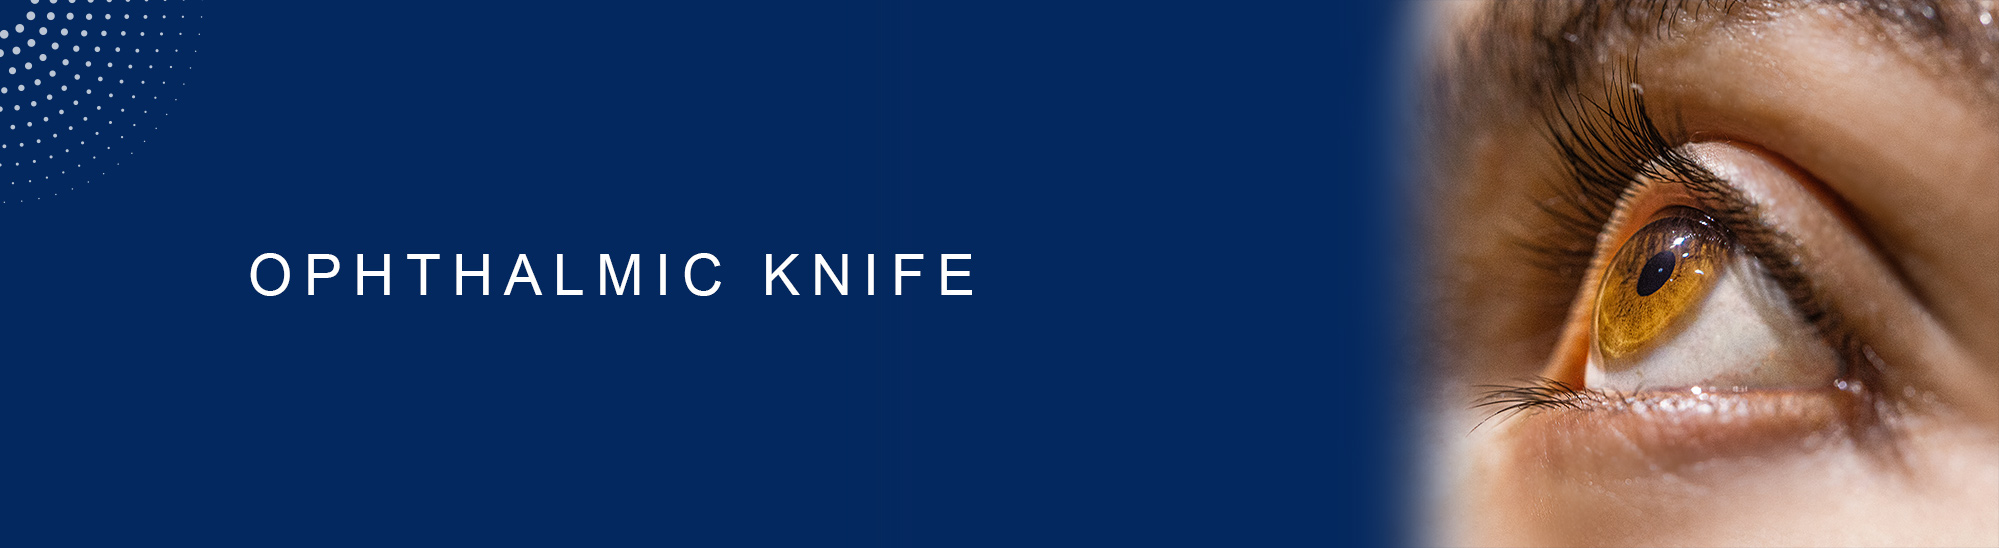 OPHTHALMIC-KNIFE